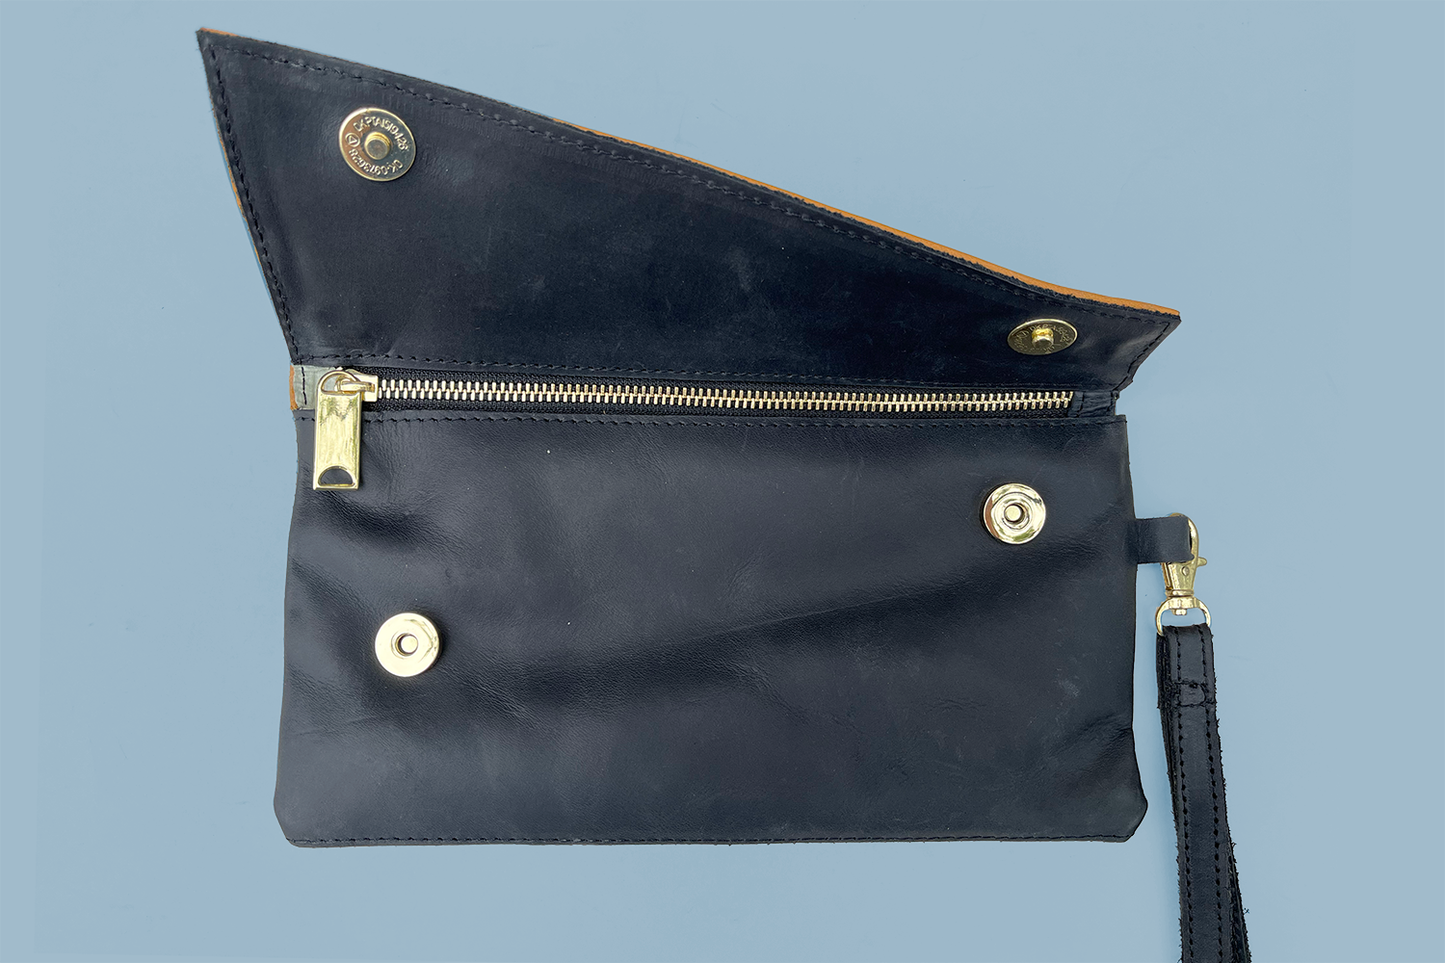 Handmade Ethical Leather Clutches